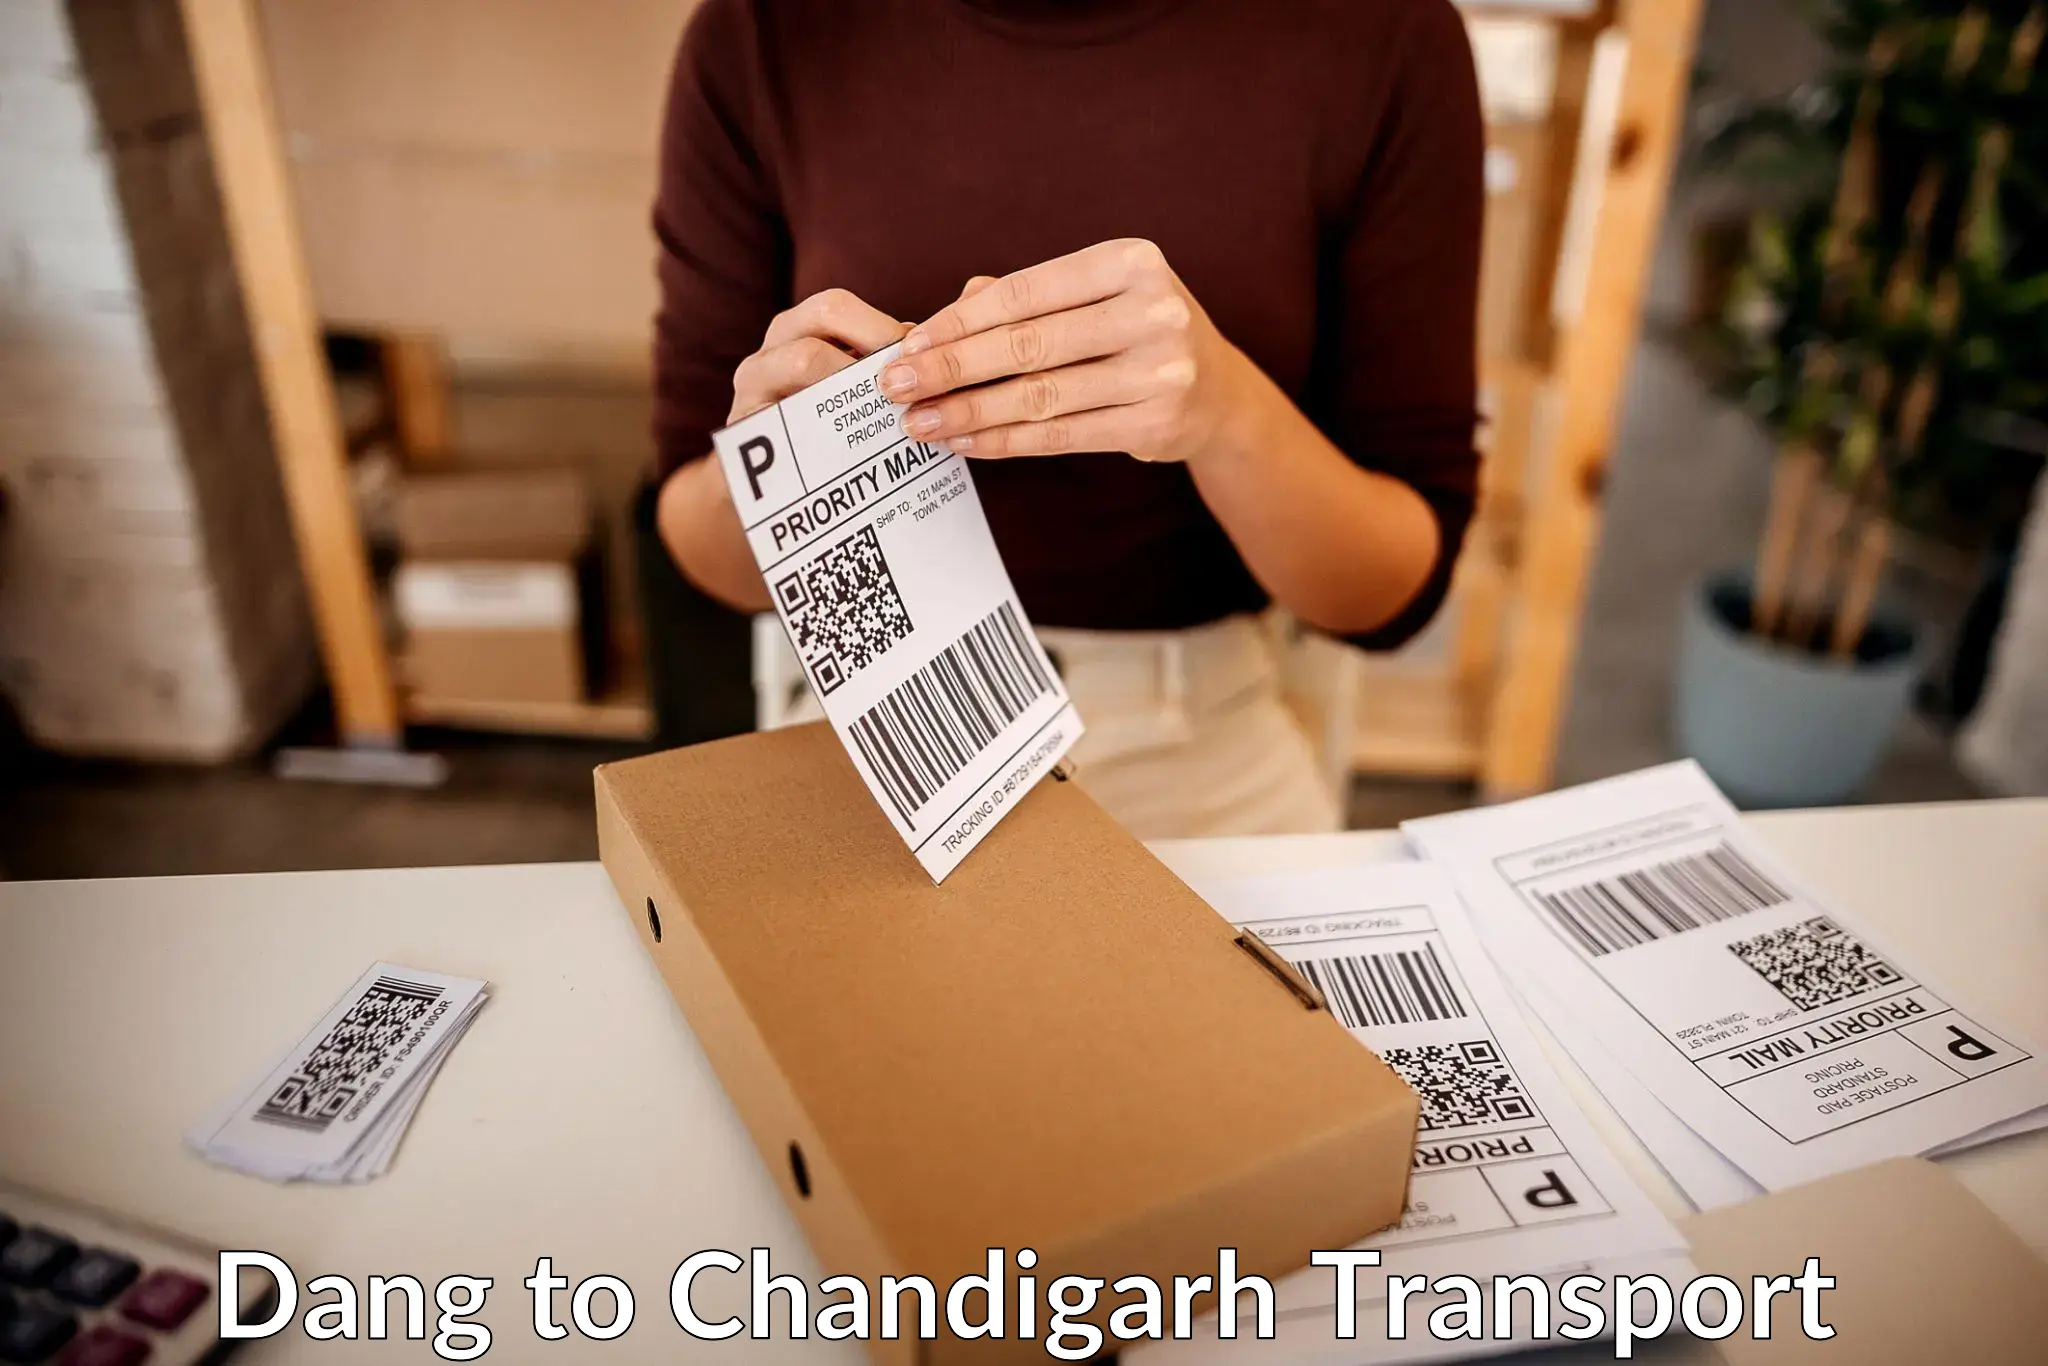 Express transport services Dang to Chandigarh